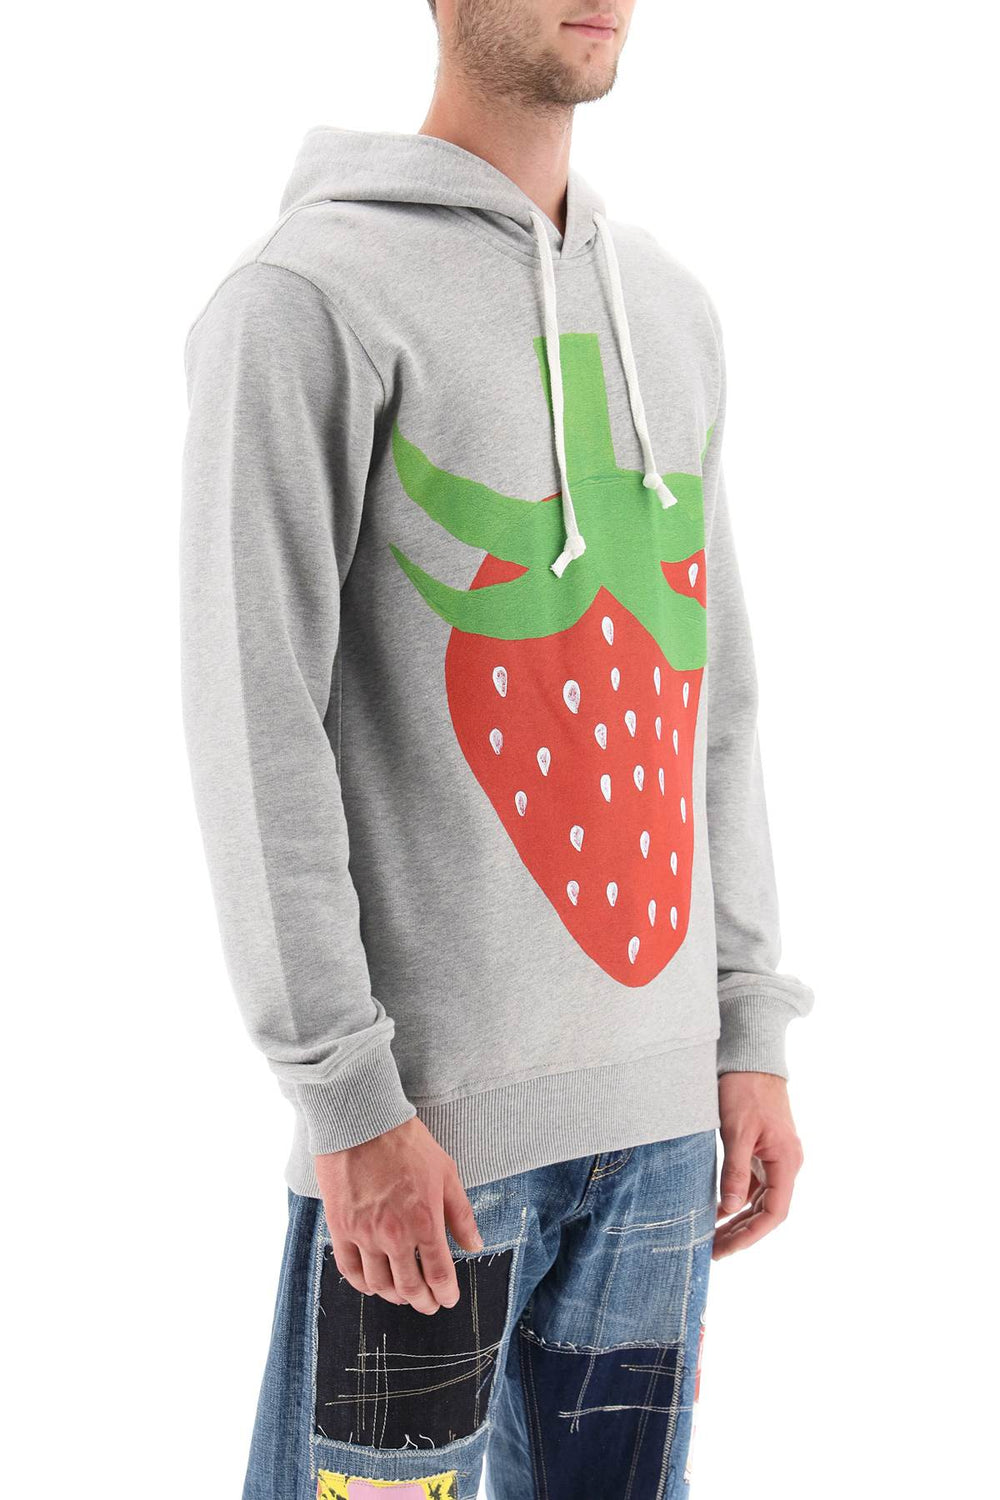 Comme des garcons shirt strawberry printed hoodie-1